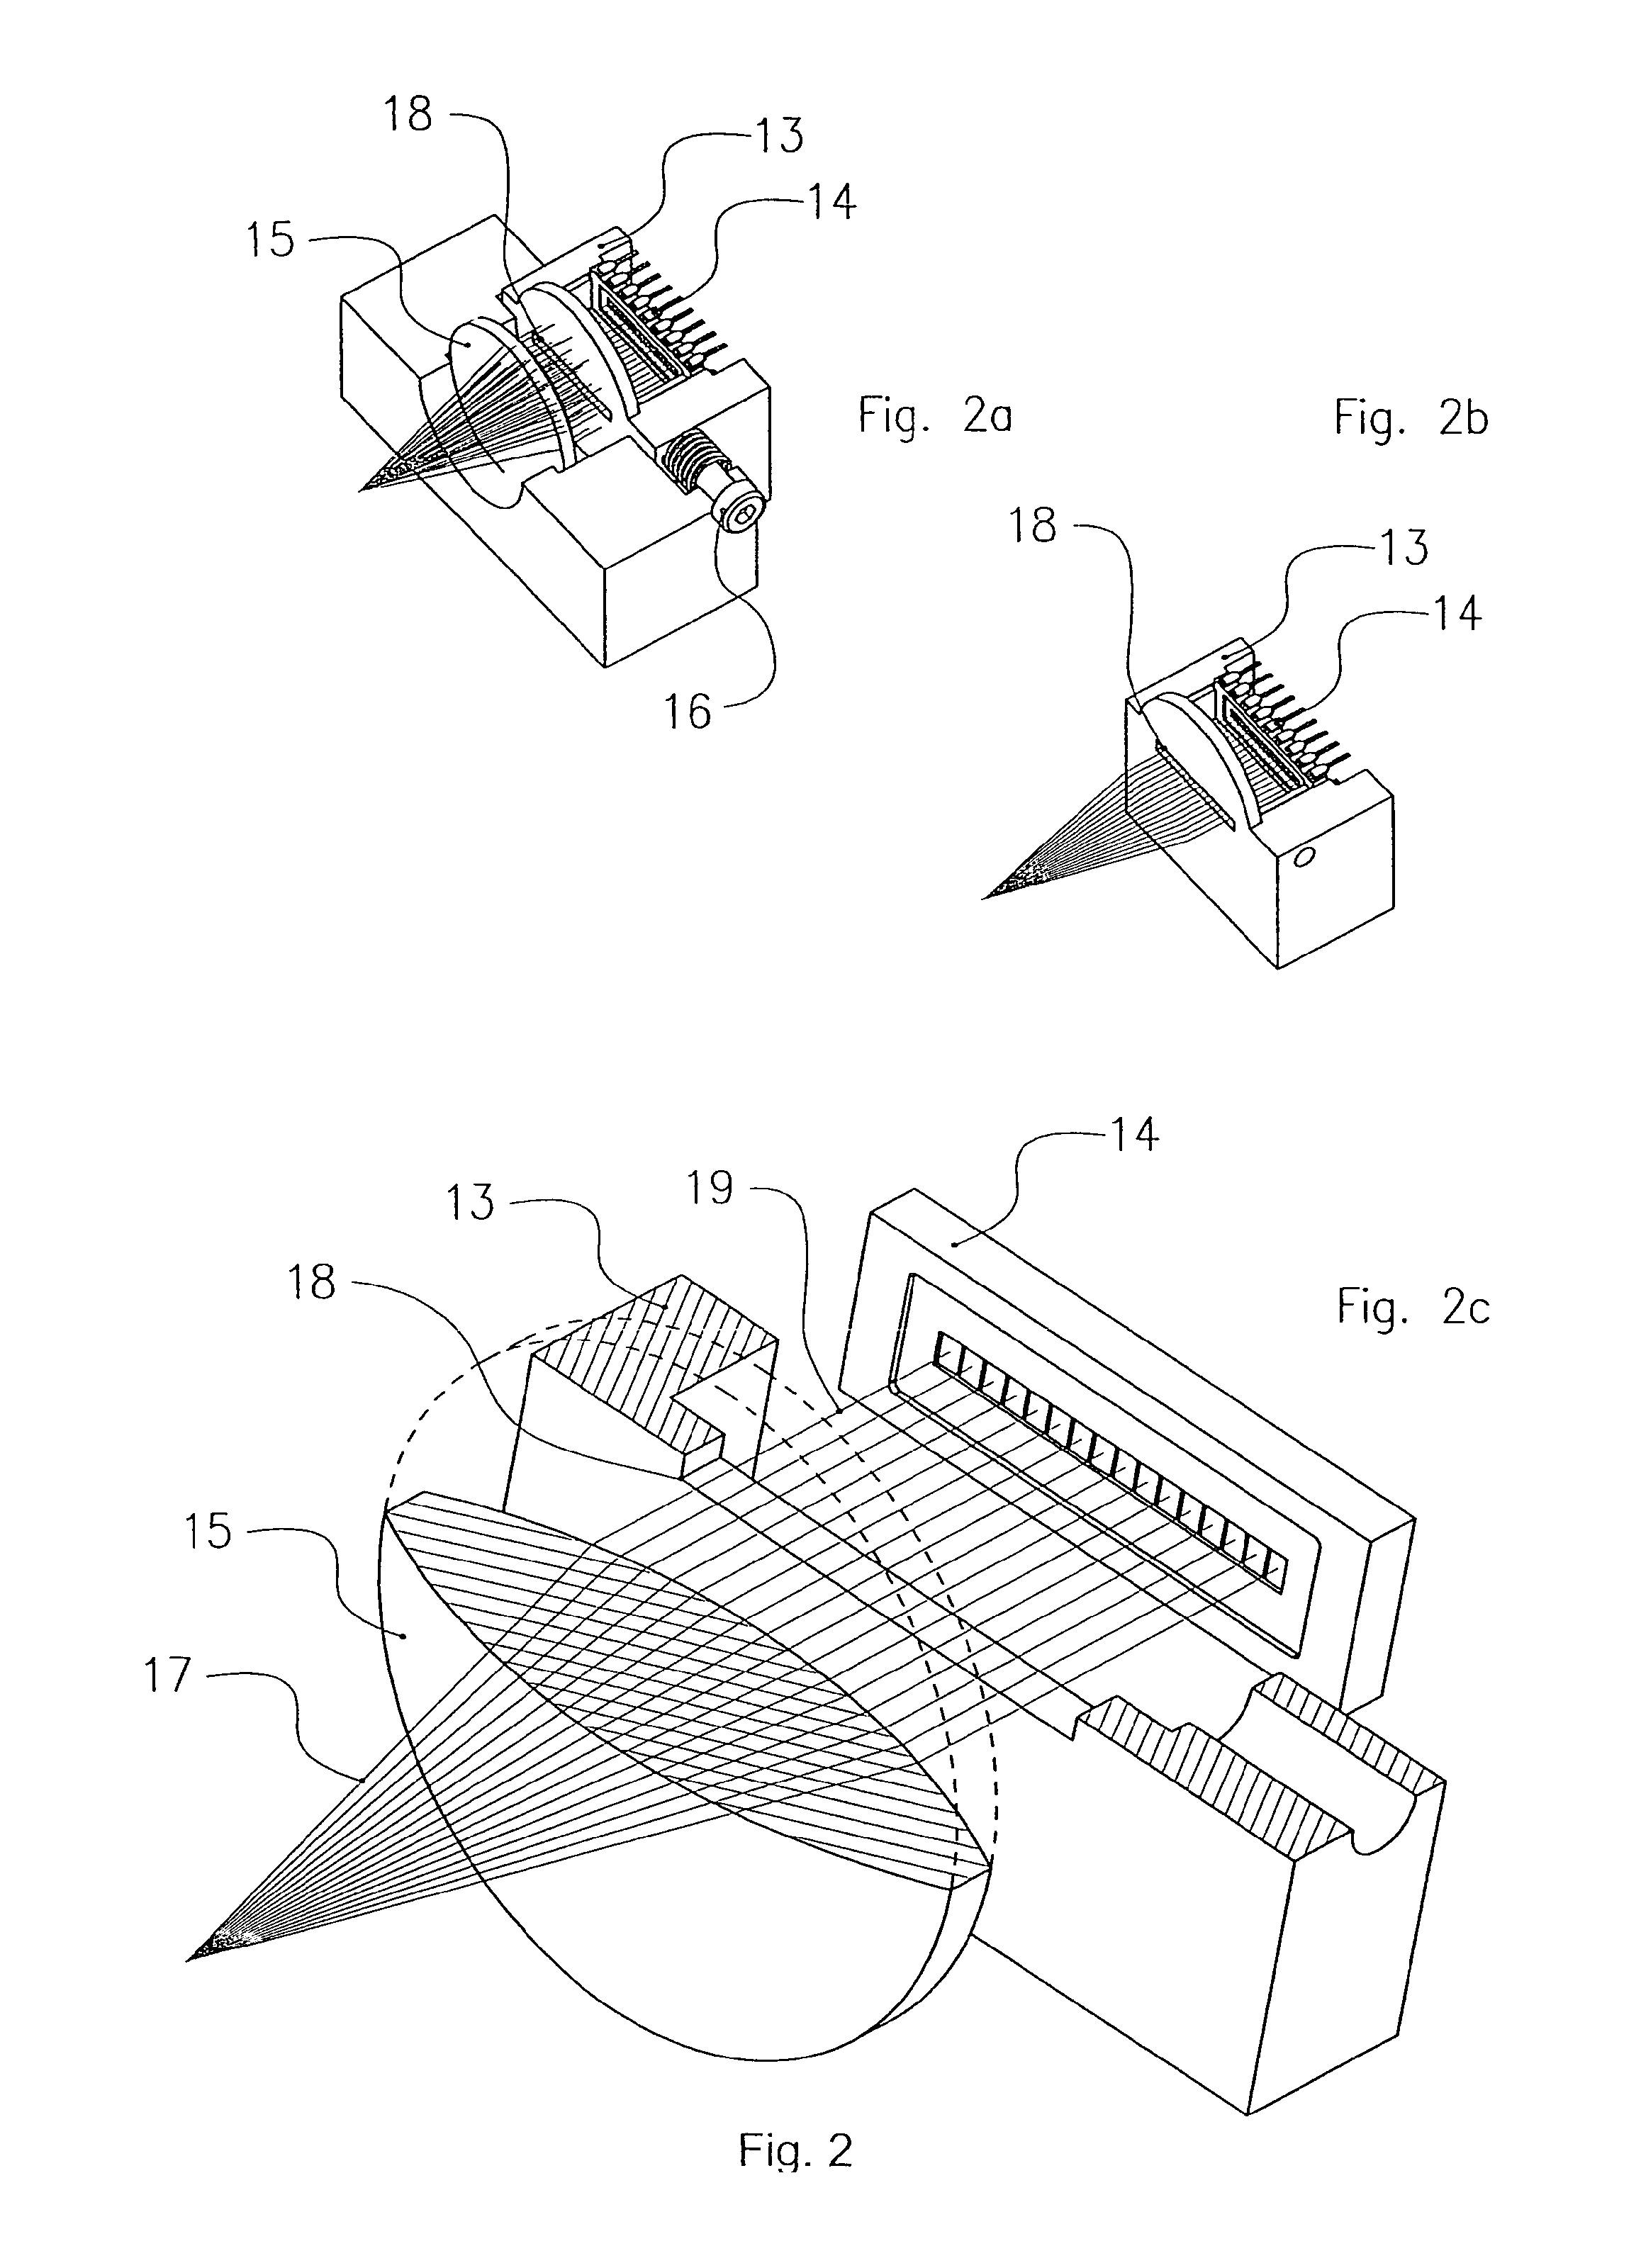 Method and device of compensating scattering light signals generated by light interaction with particles or biological cells moving in fluid currents, such as in flow cytometry